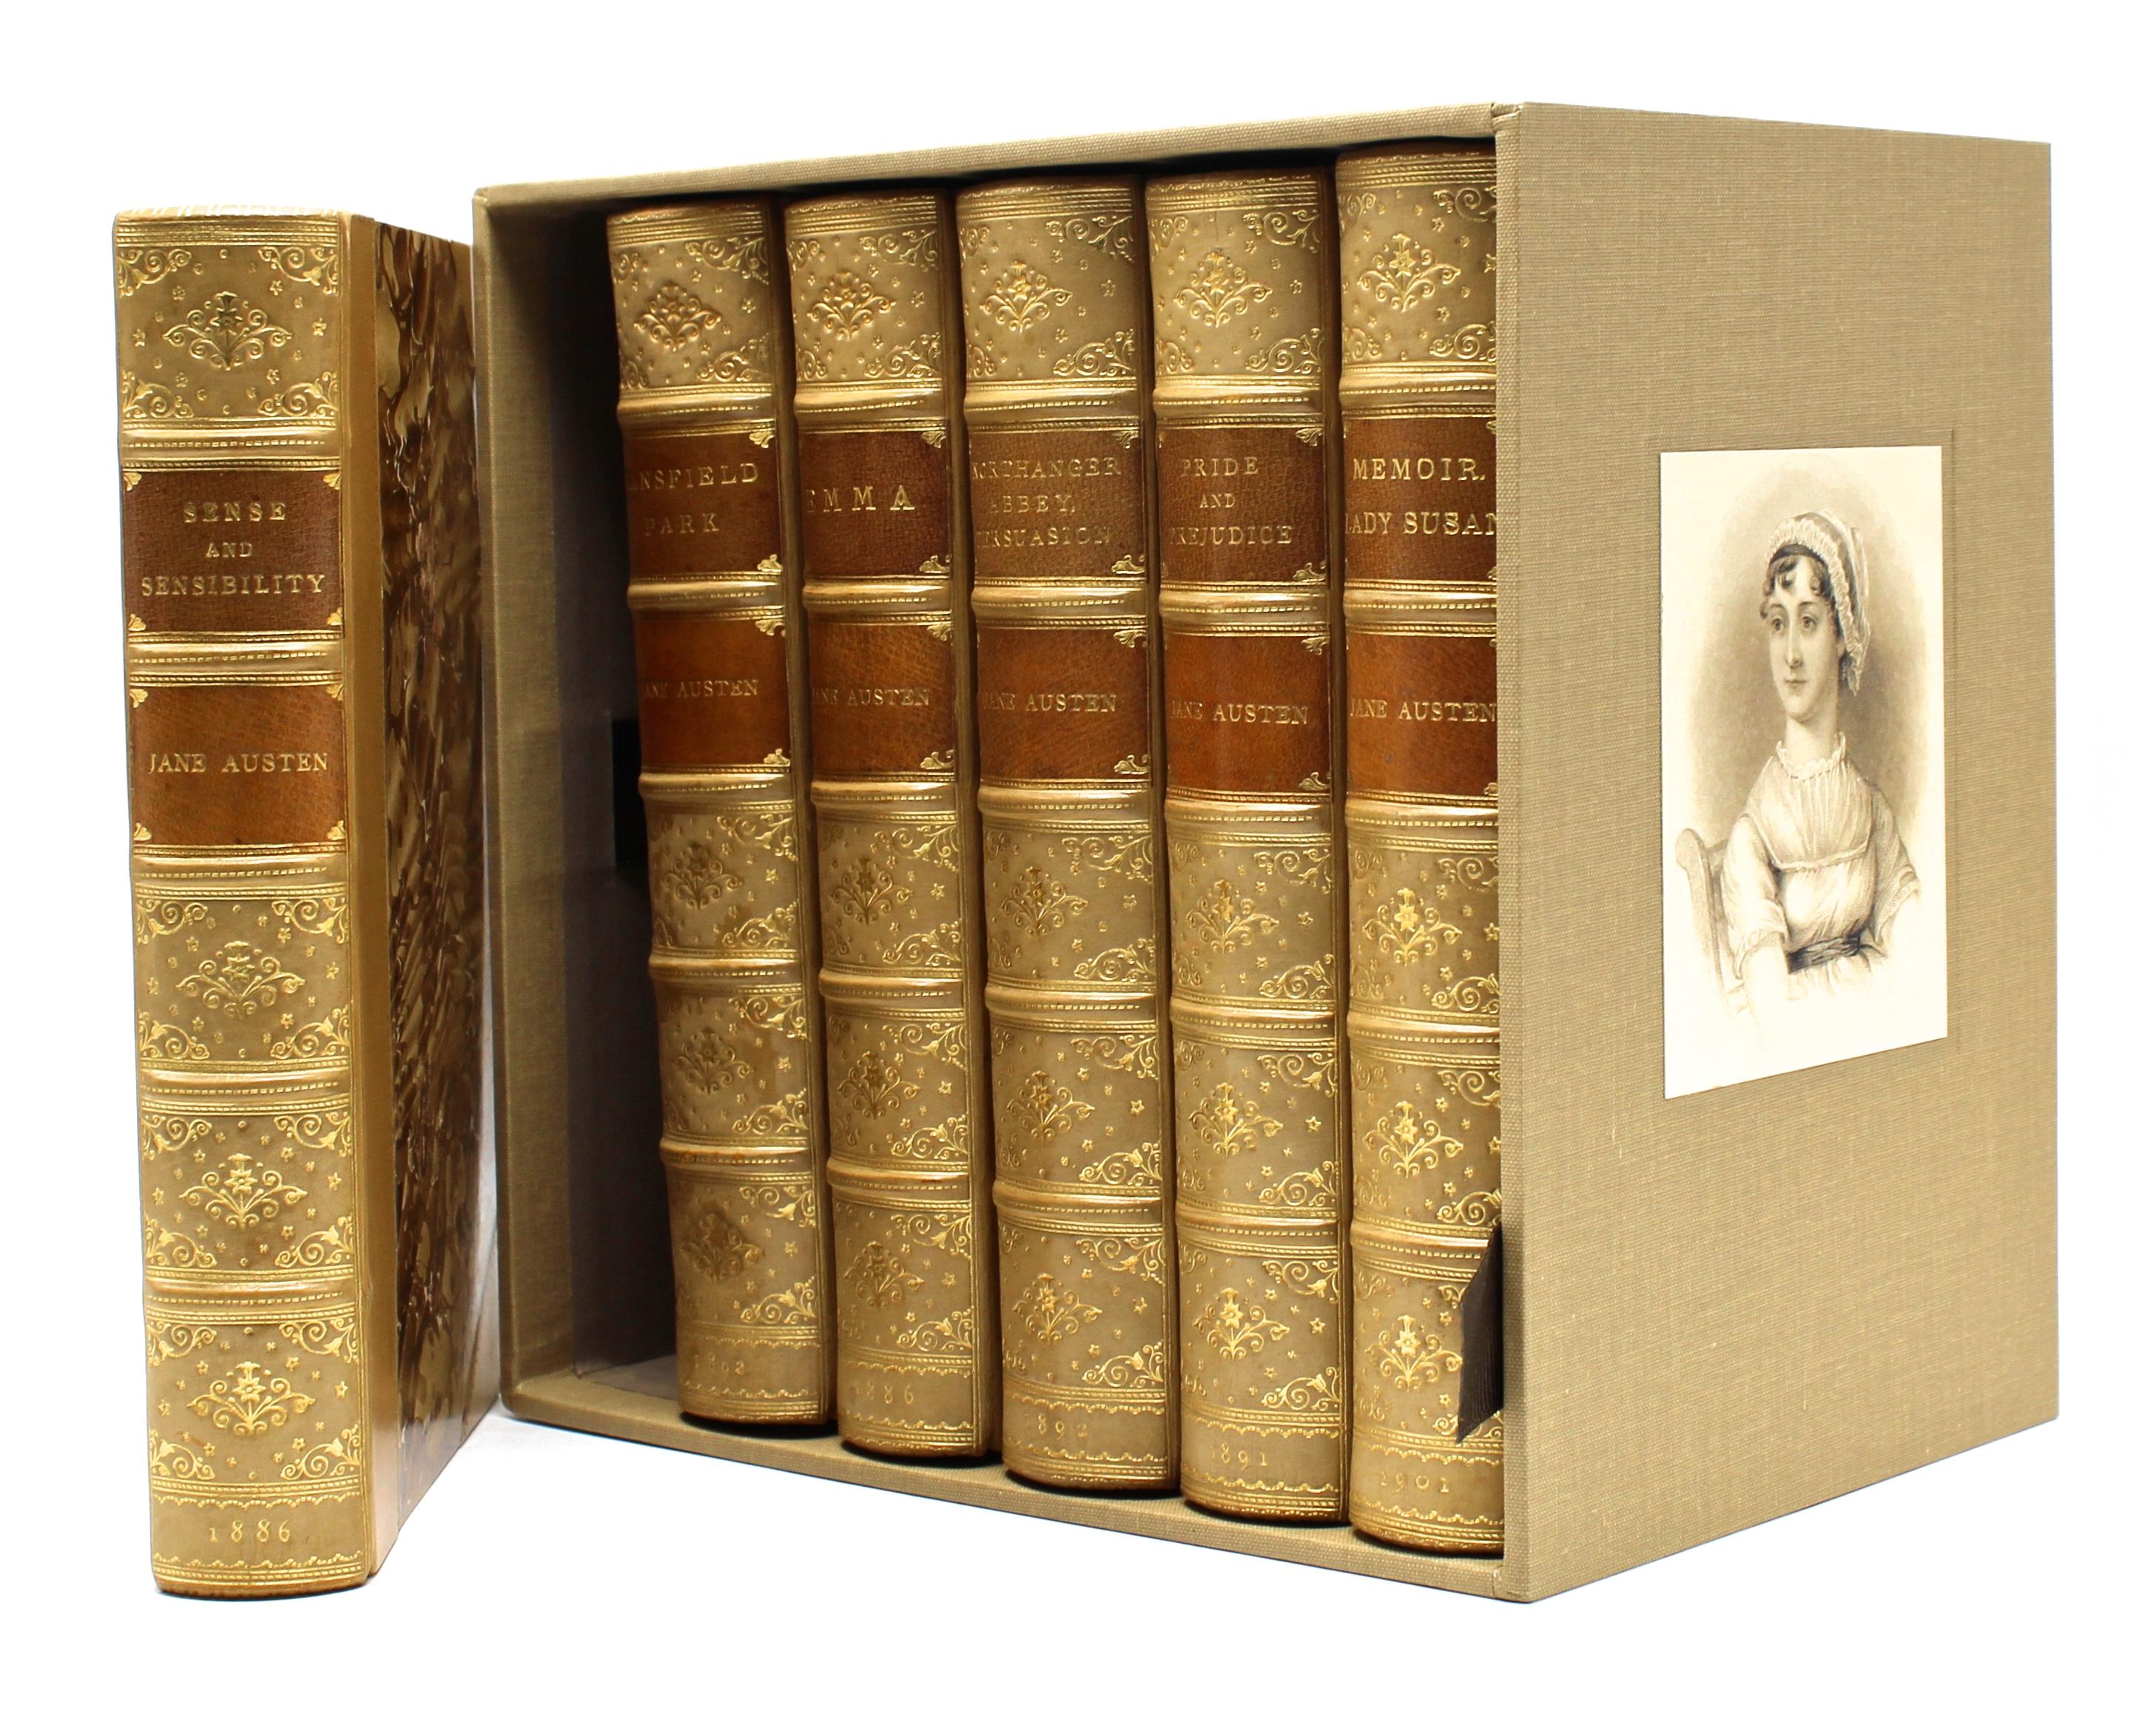 Presented is a beautiful six volume set of Jane Austen’s novels, published by Richard Bentley & Son, in London and in stunning period bindings from London's House of Morrell. This new edition “Austen Standard Novels” set includes Sense and